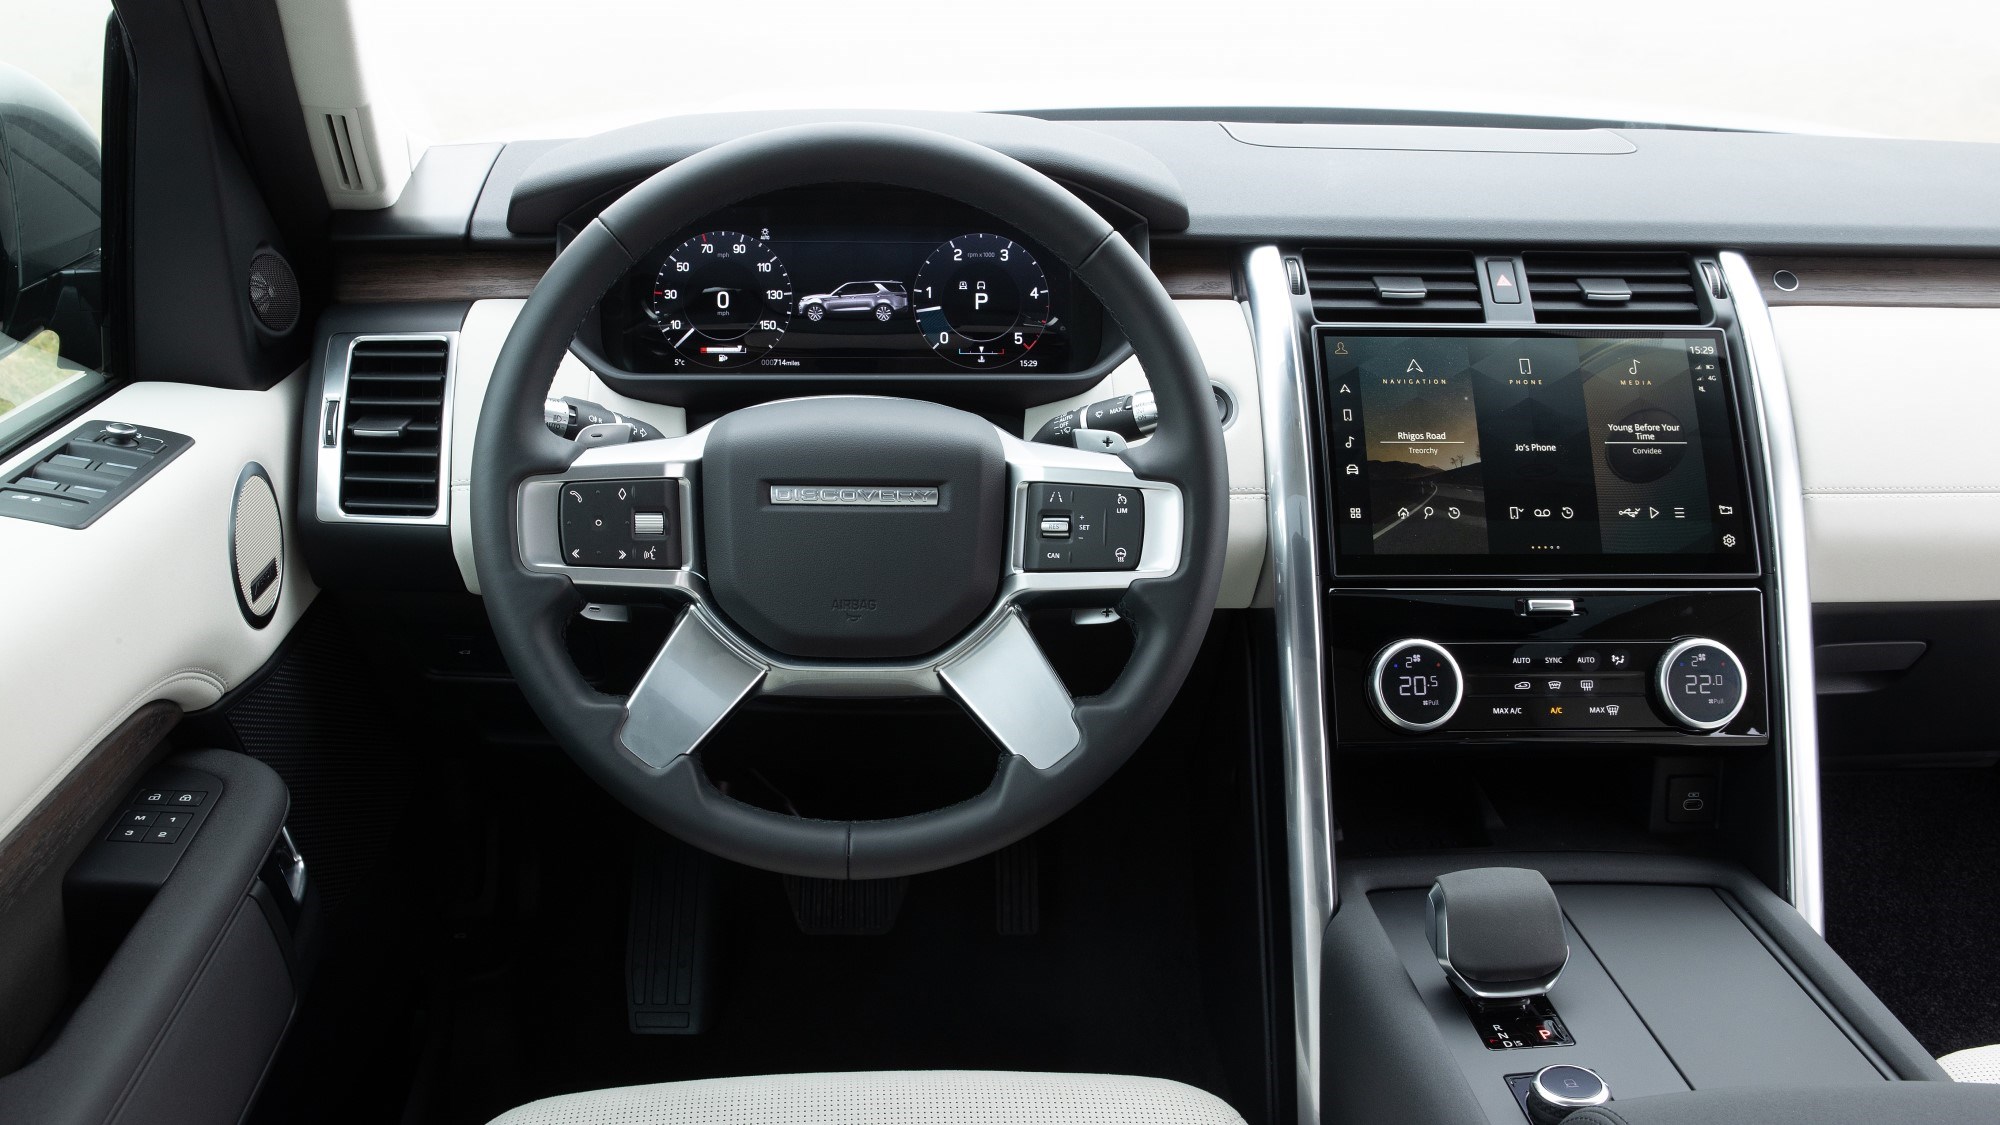 2021 Land Rover Discovery interior